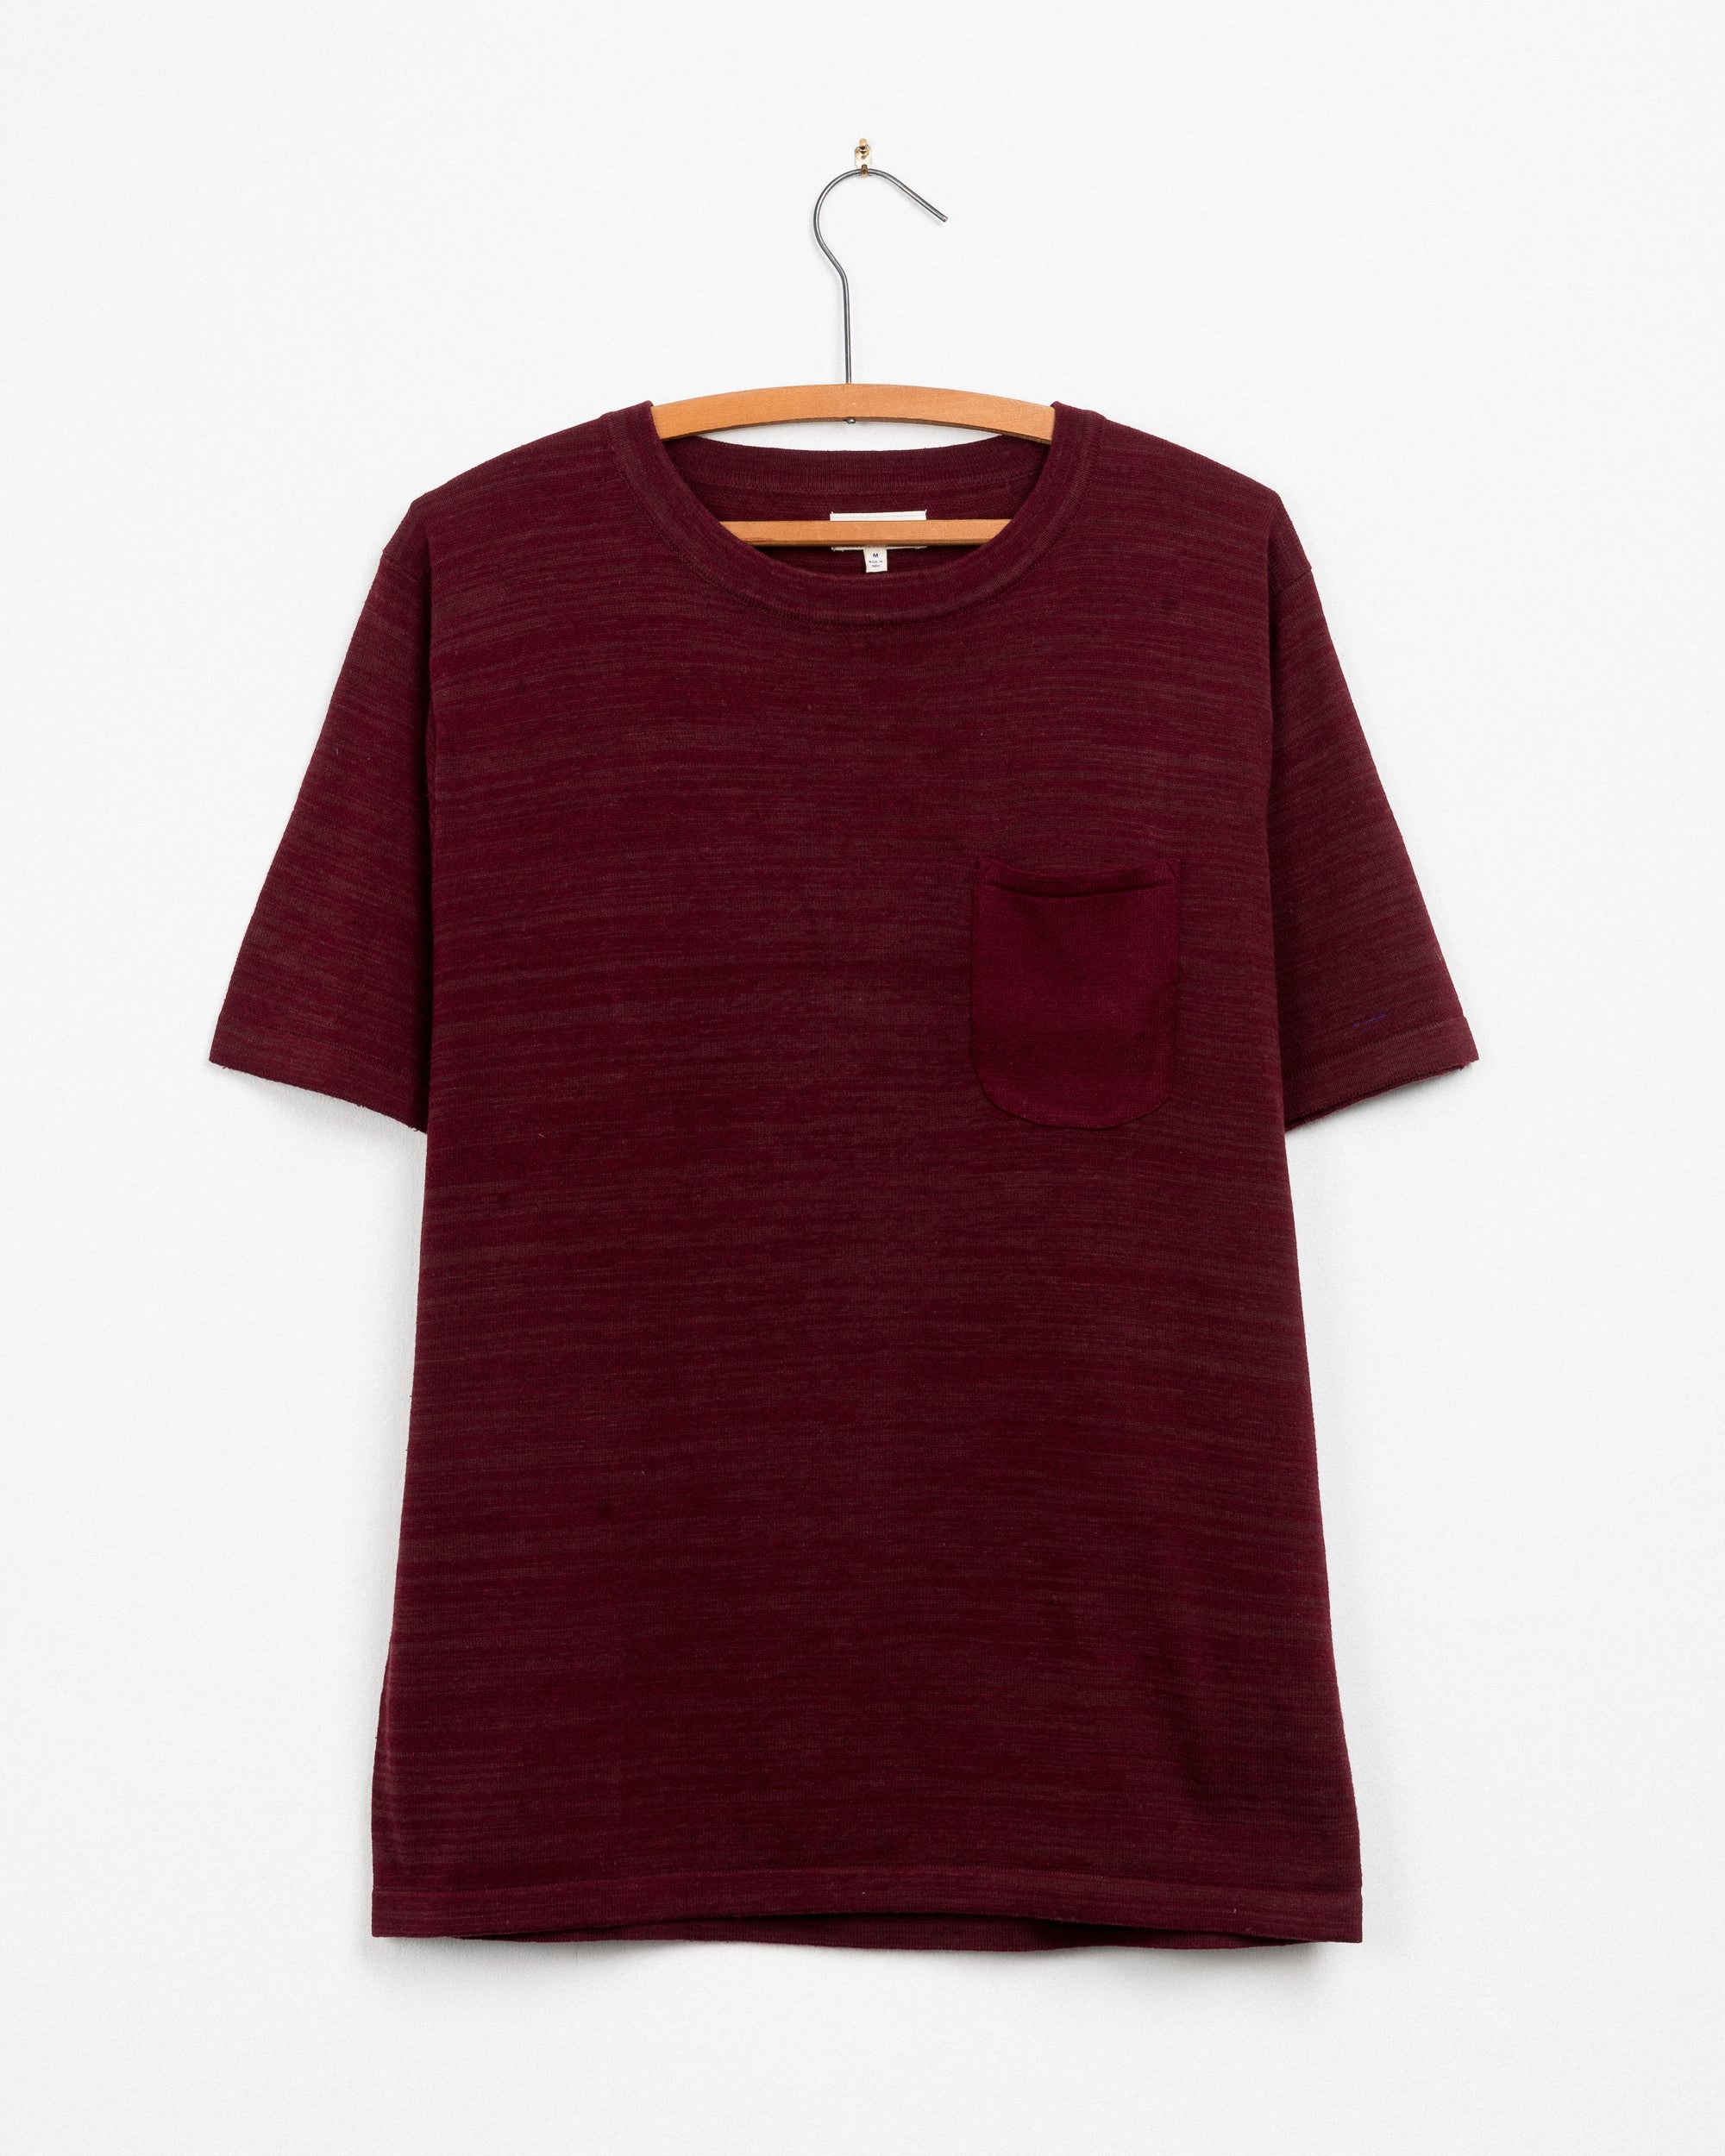 Azad S/S Pocket Flat Knitted Tee in Maroon